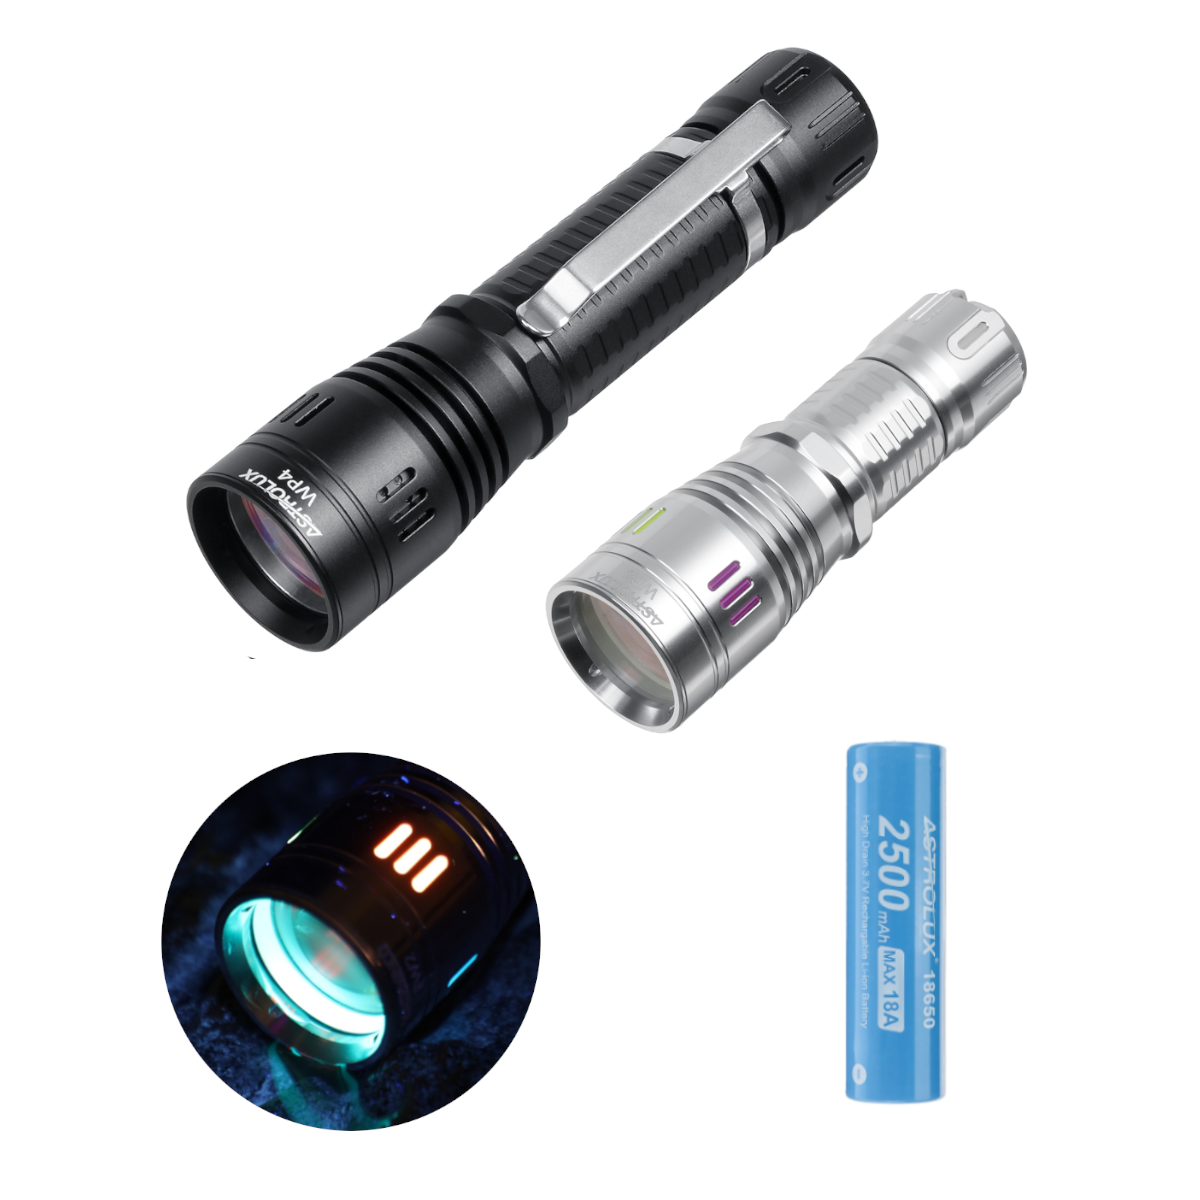 Astrolux? WP4 1303m 310LM LEP Flashlight Waterproof Outdoor Search Camping Hunting Strong Thrower DI